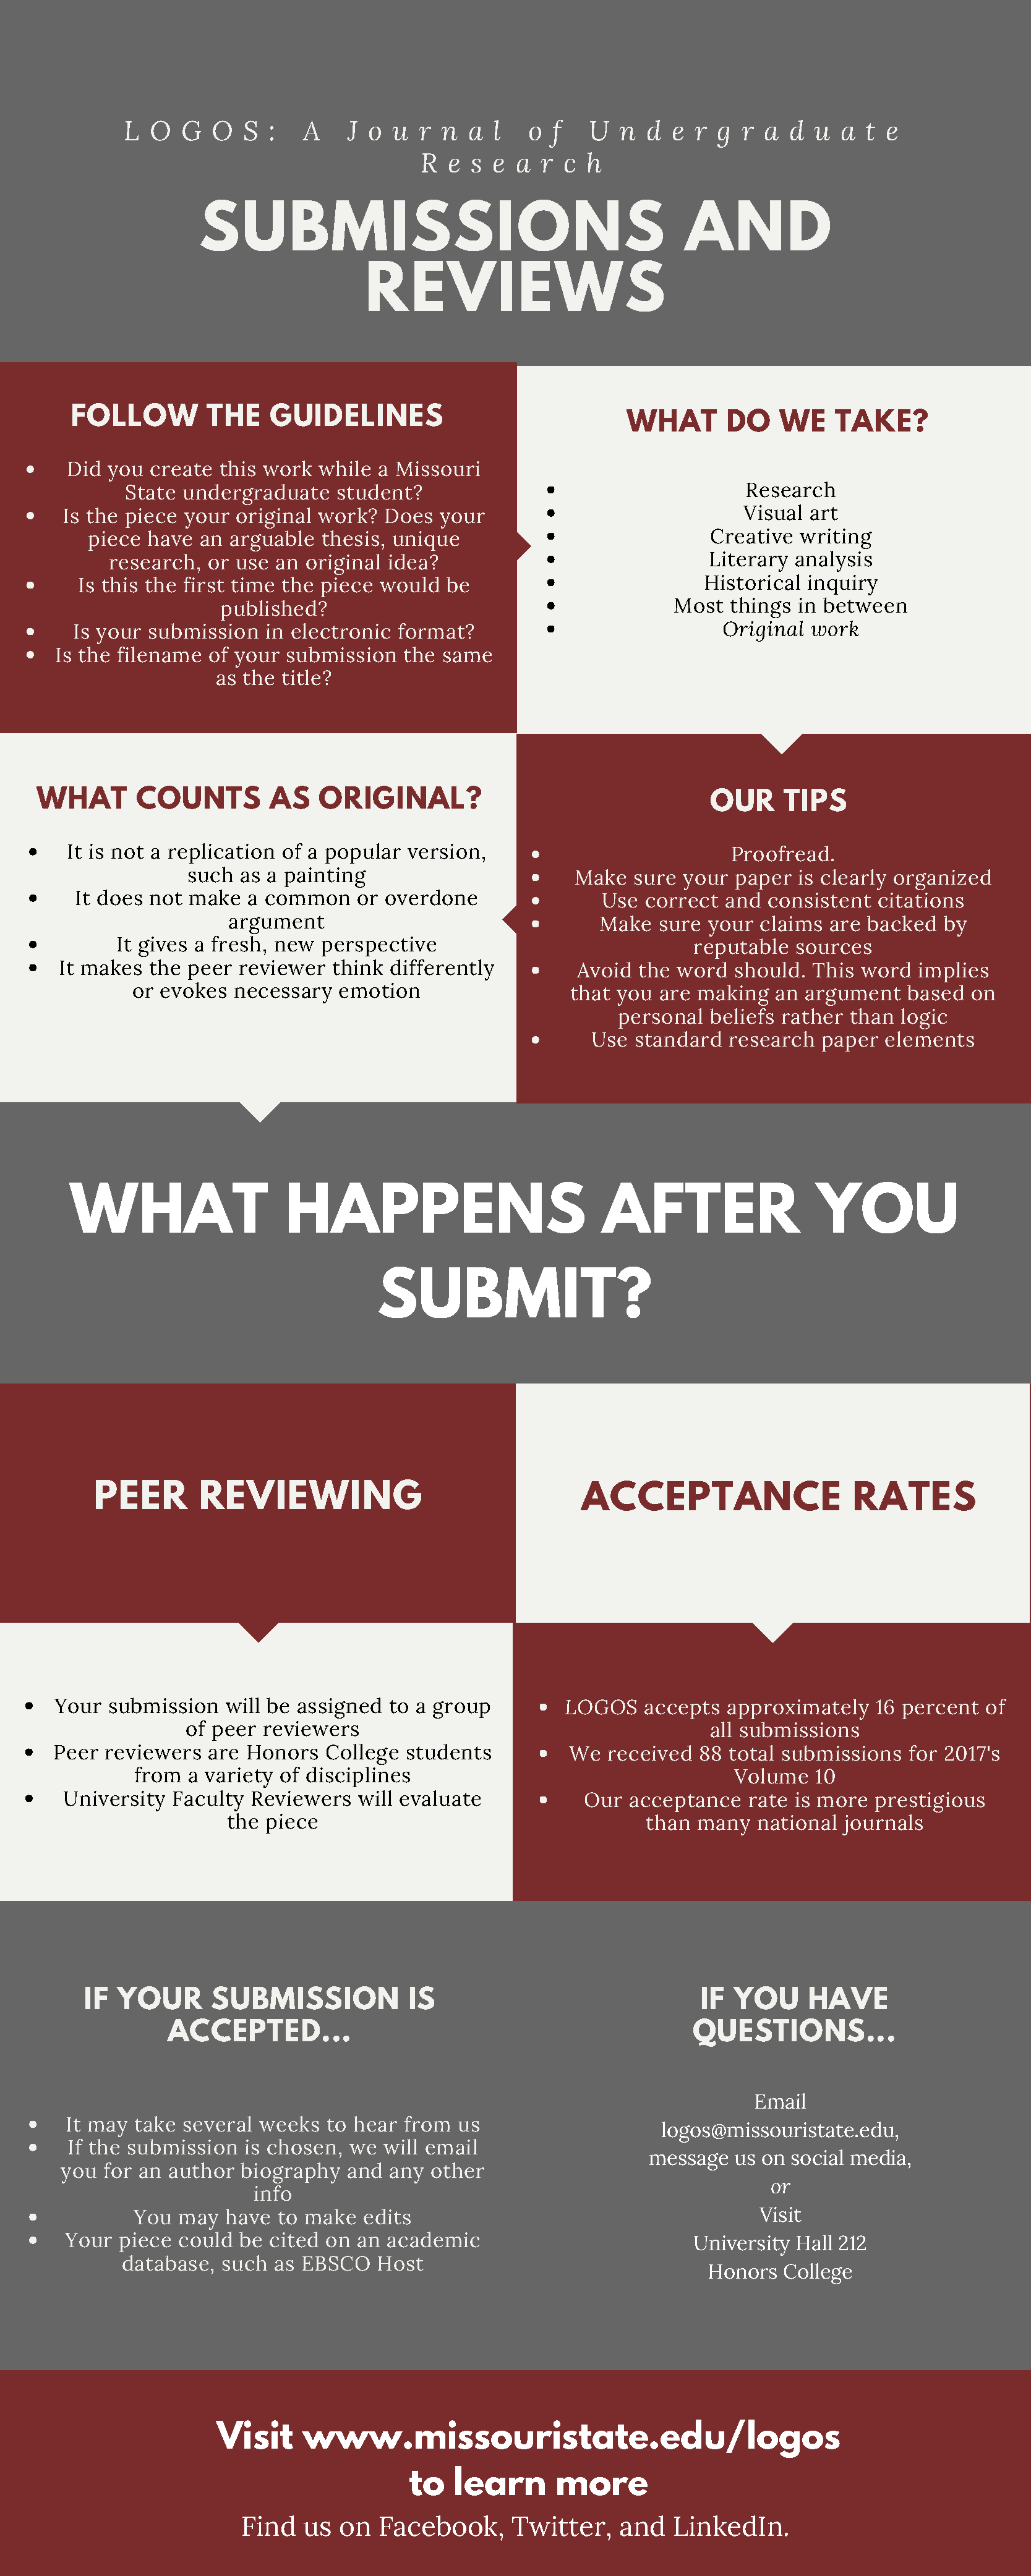 Infographic of the LOGOS submission process